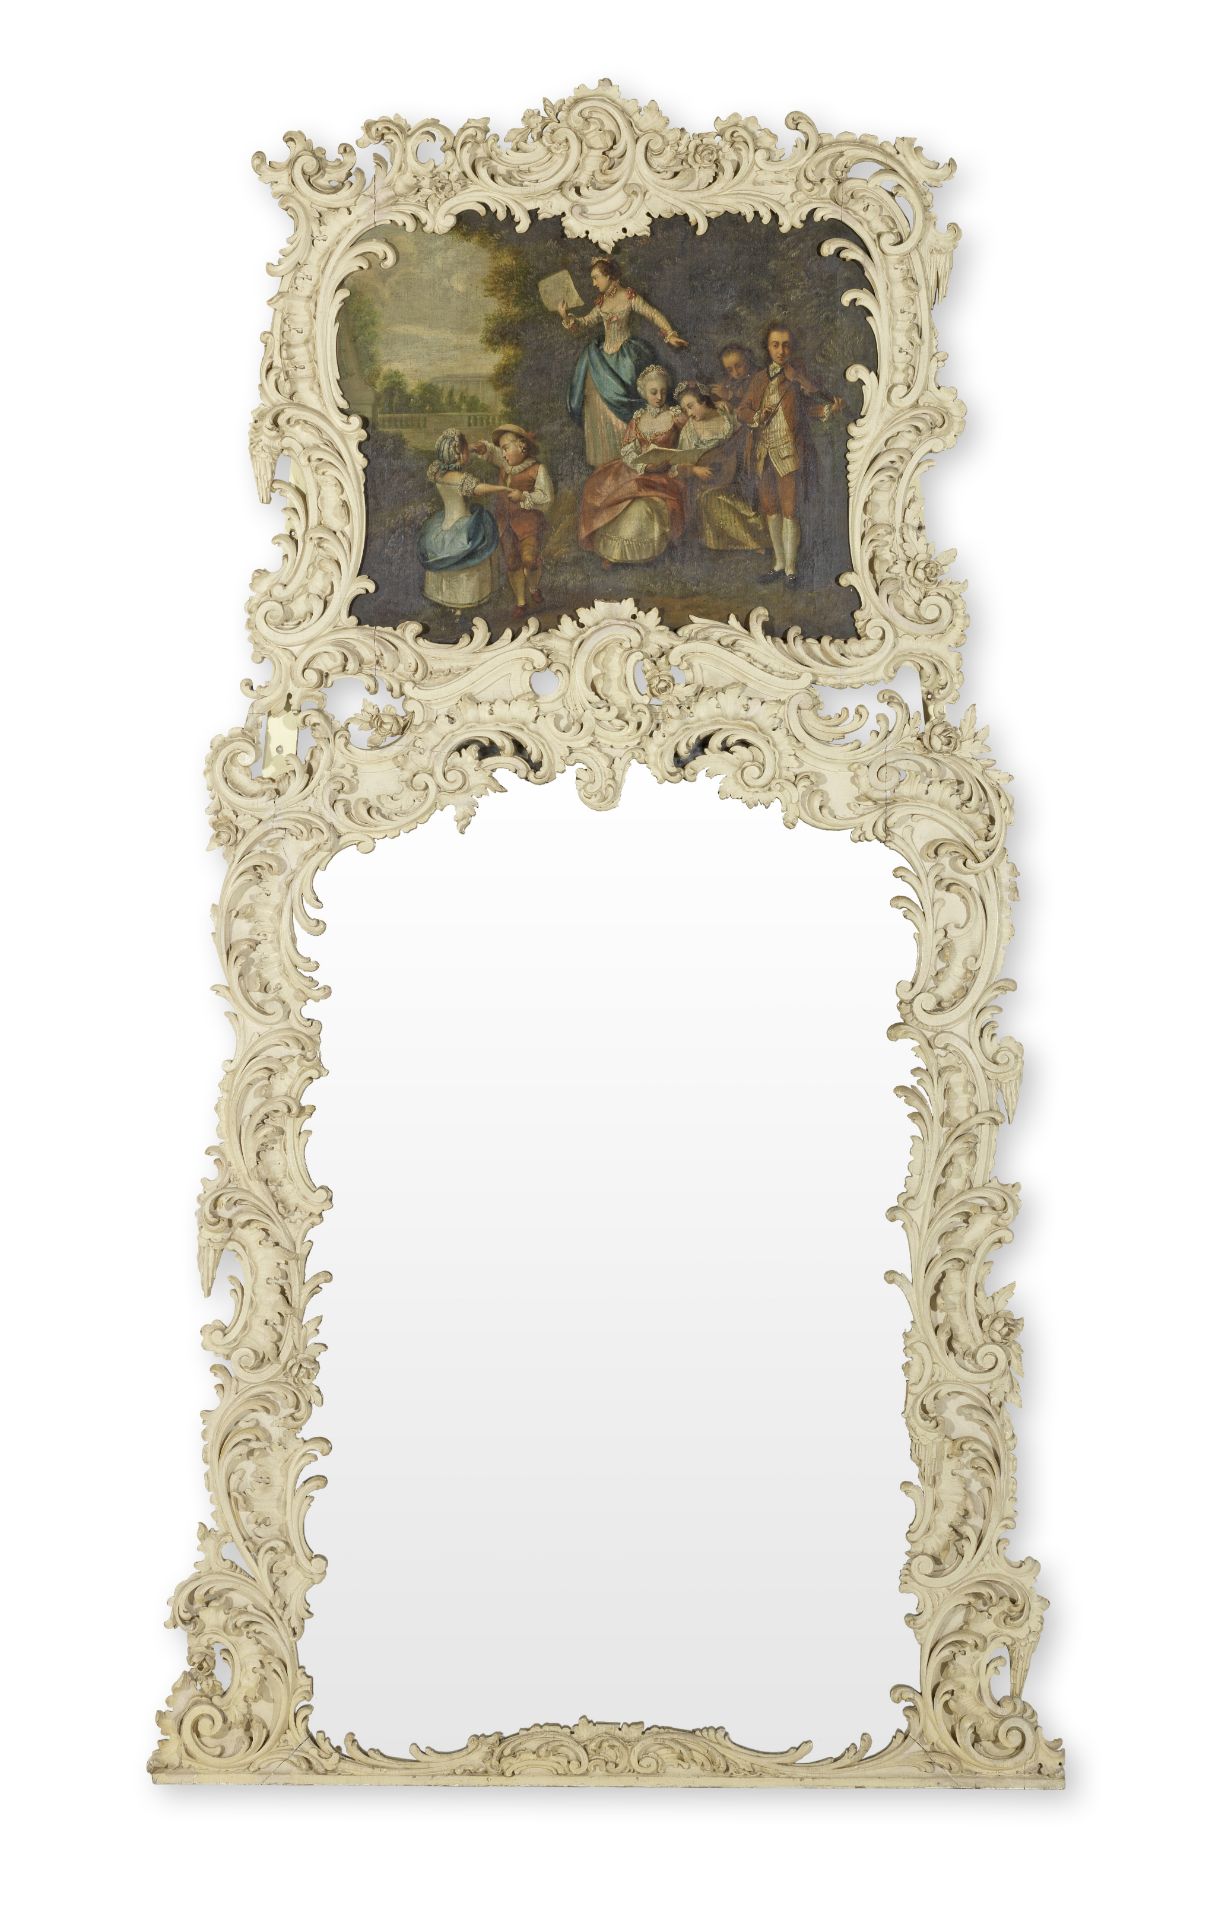 A very large German 19th century 'Rococo revival' painted trumeau mirror